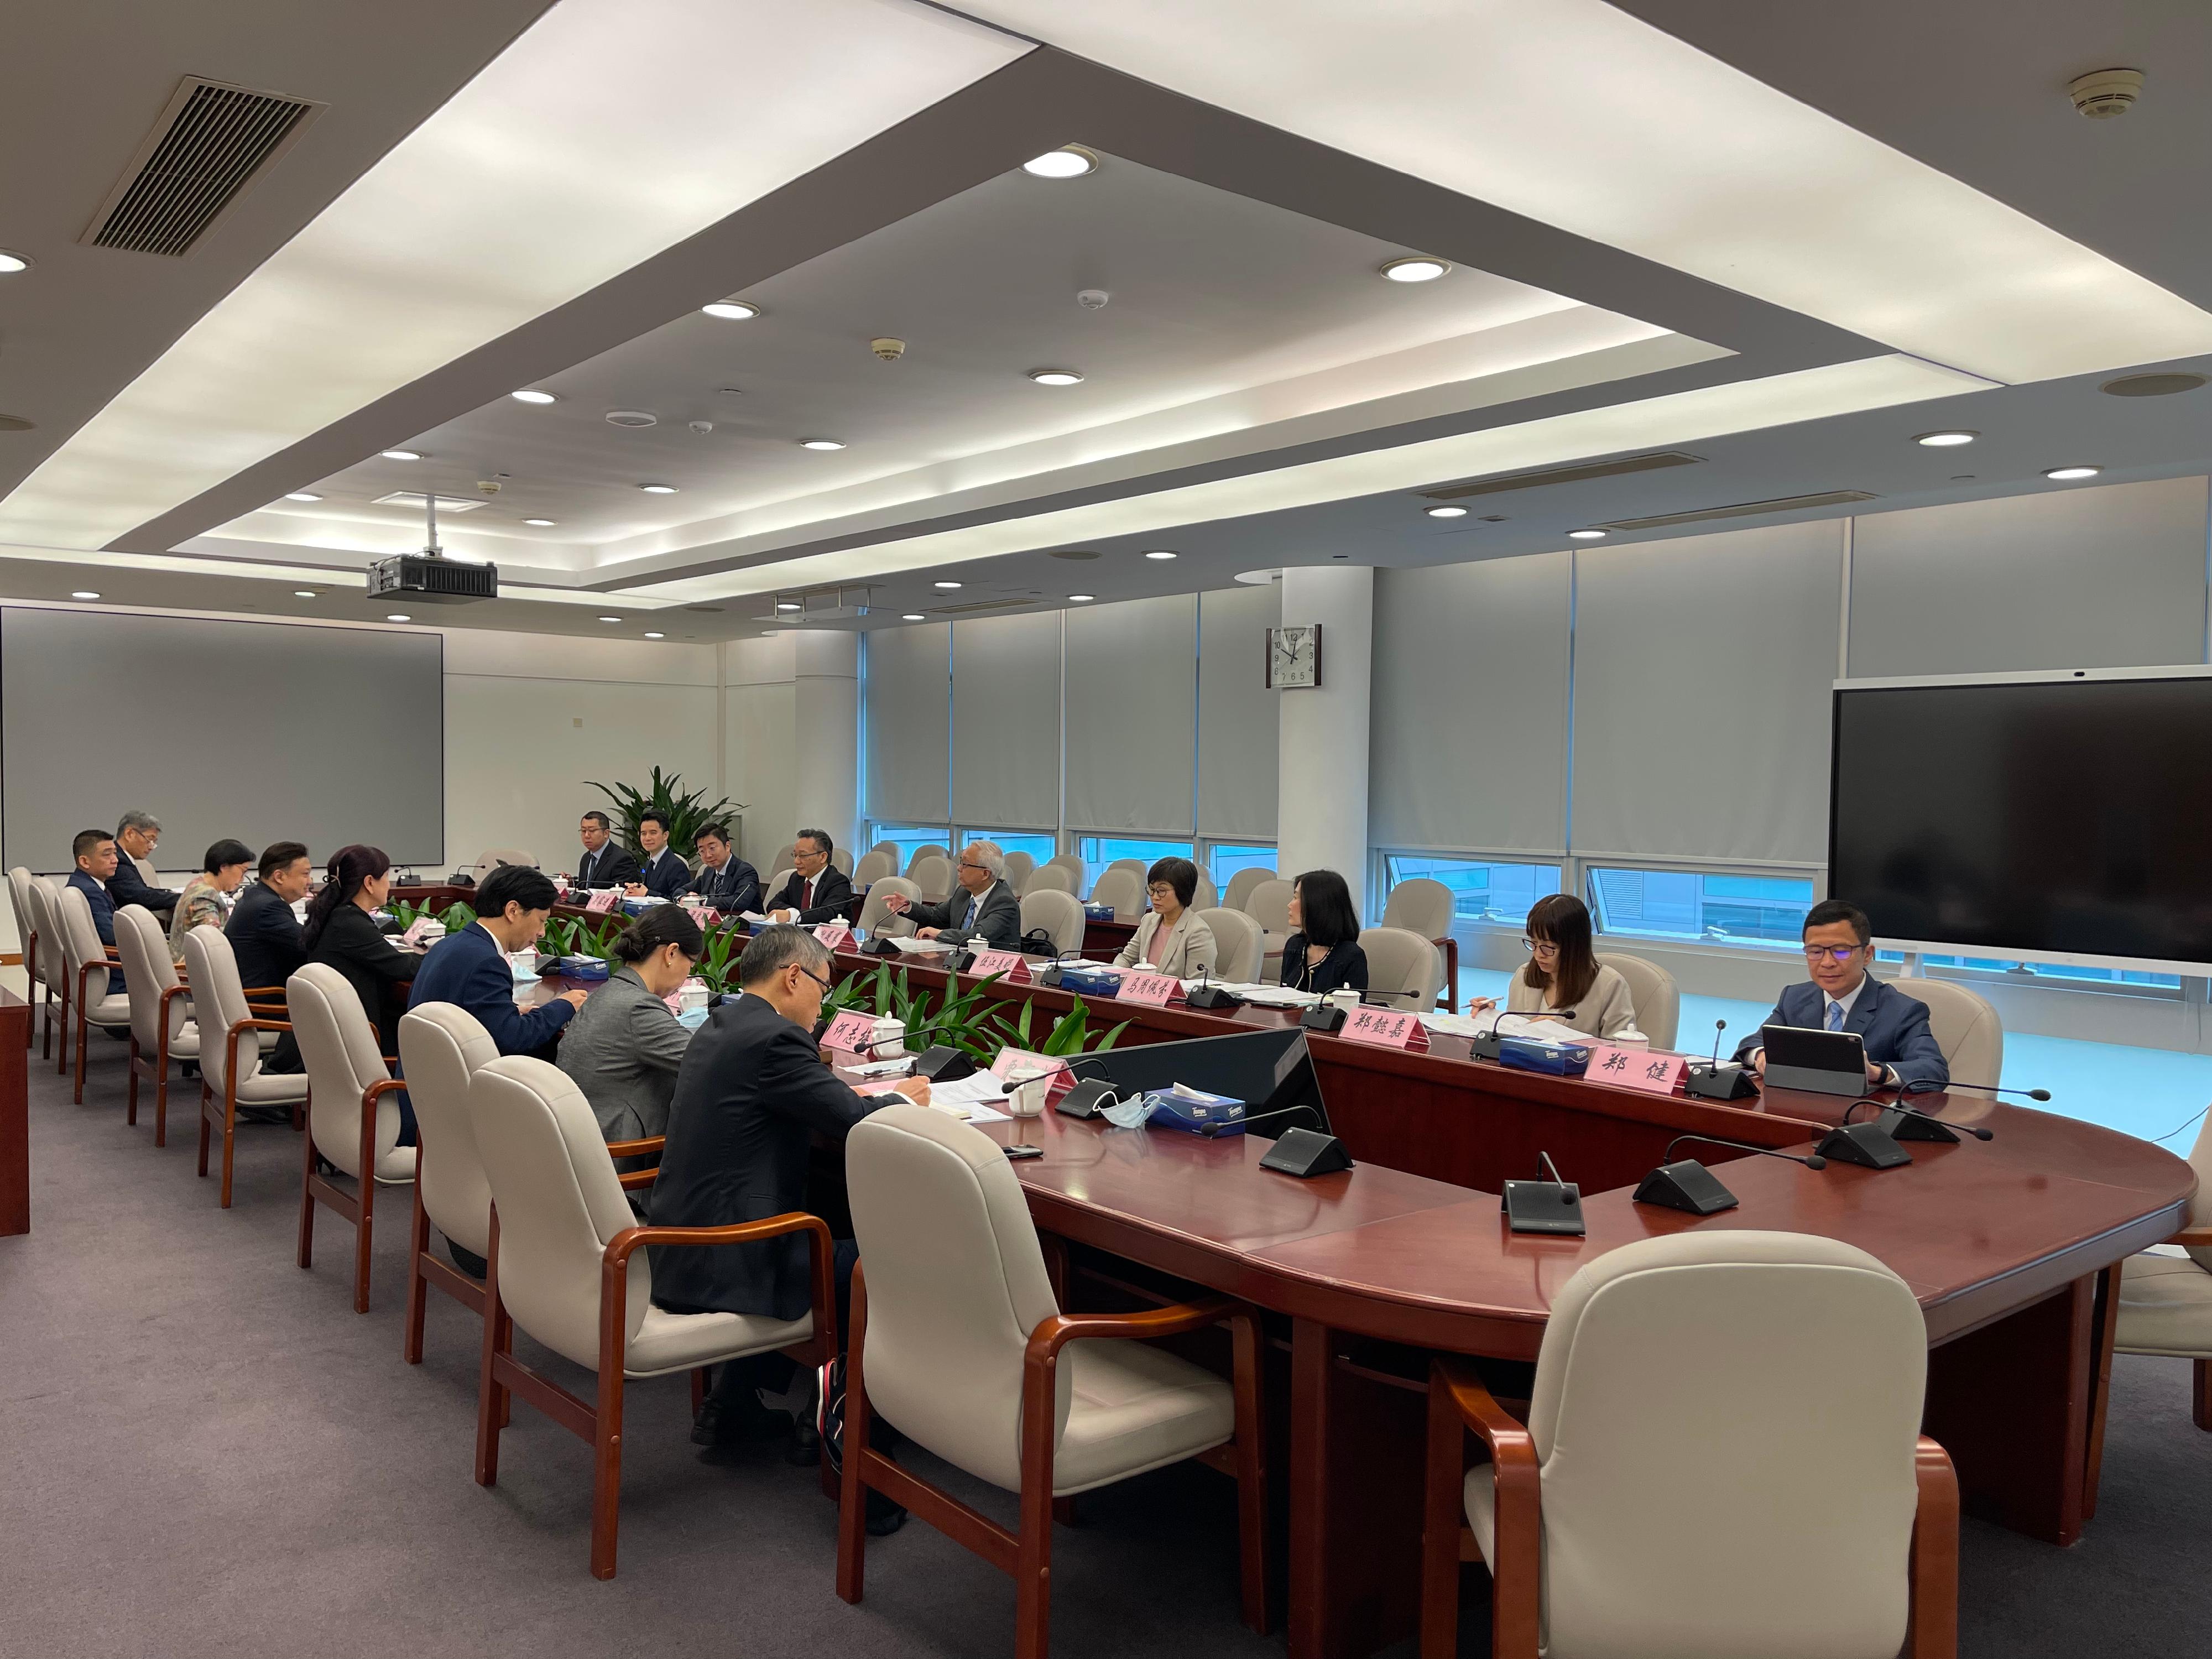 The Secretary for Environment and Ecology, Mr Tse Chin-wan, visited Shenzhen and attended a meeting with Shenzhen officials today (March 20) to exchange views and discuss collaboration on environmental protection issues including air quality in Shenzhen and Hong Kong, new energy transport measures and ecology conservation. Photo shows Mr Tse (back row, fifth right) meeting with Vice Mayor of the Shenzhen Municipal People's Government Ms Zhang Hua (front row, fourth right) to explore directions for co-operation between Hong Kong and Shenzhen in combating air pollution and promoting carbon reduction incentives, as well as to share strategies and achievements in promoting new energy transport measures in both places.